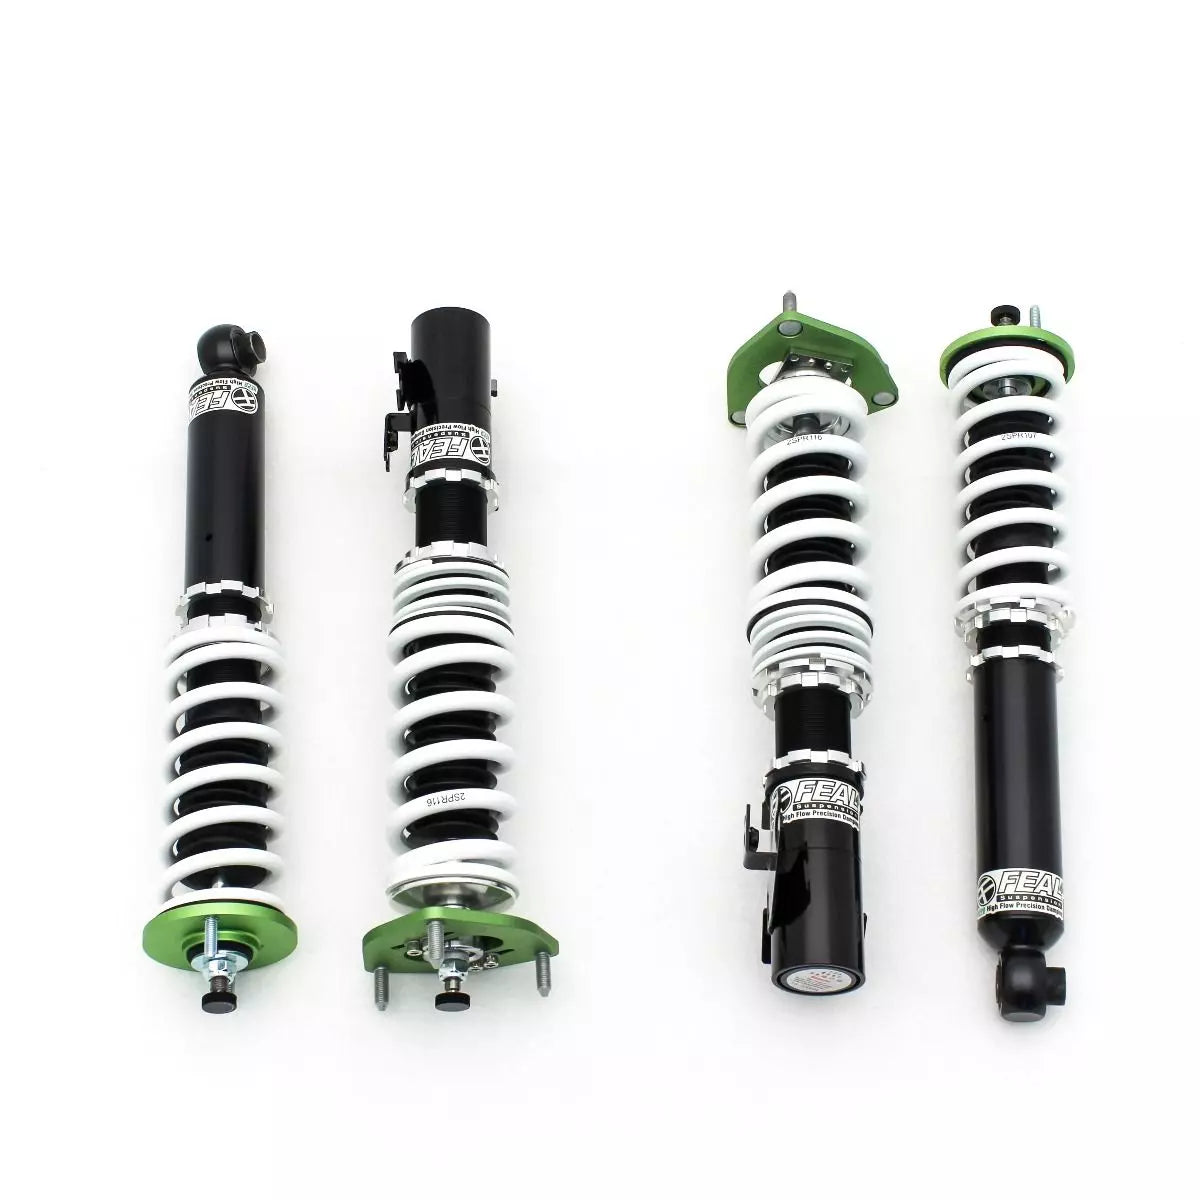 Wisefab Nissan S13 Feal Coilover Kit 441 8K/5K